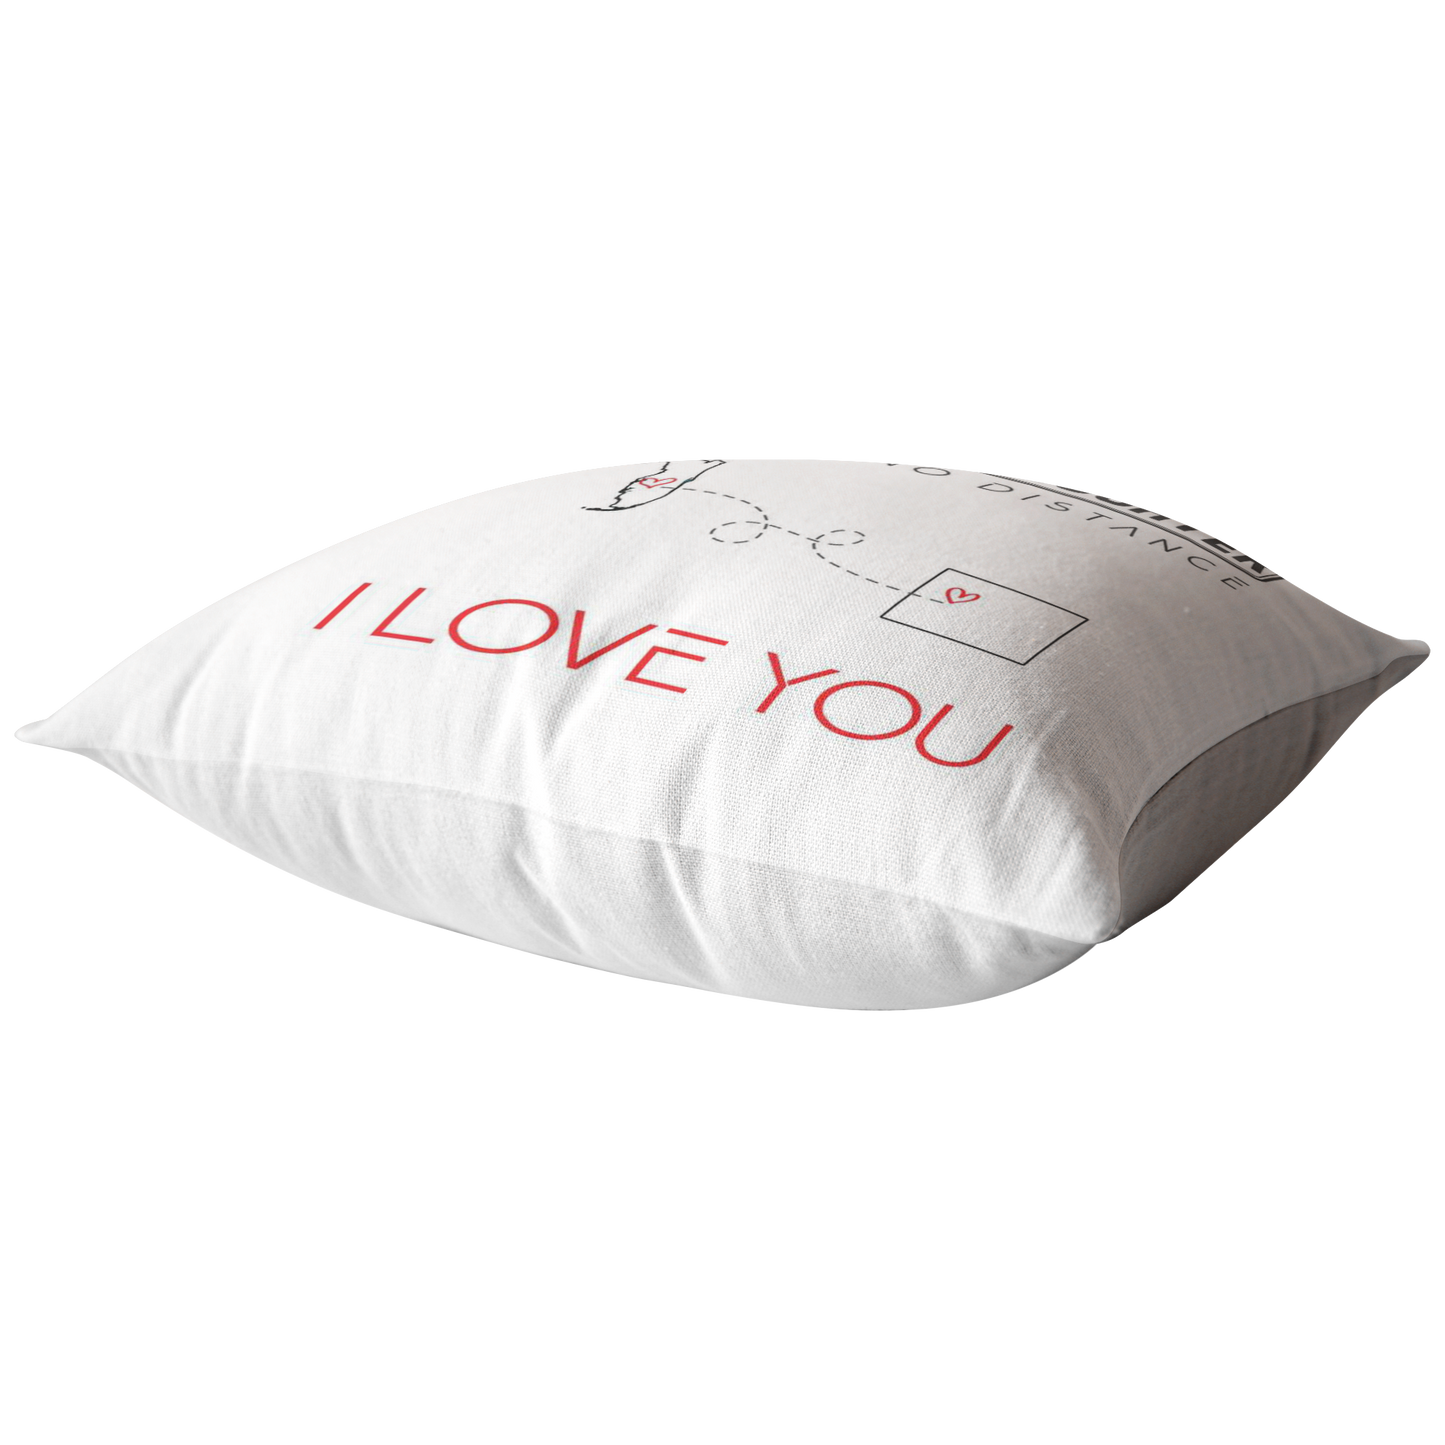 ND-PL21408207-sp-25775 - [ Florida | Colorado ] (PI_ThrowPillowCovers) Mothers Day Gifts From Daughter - The Love Between Mother A